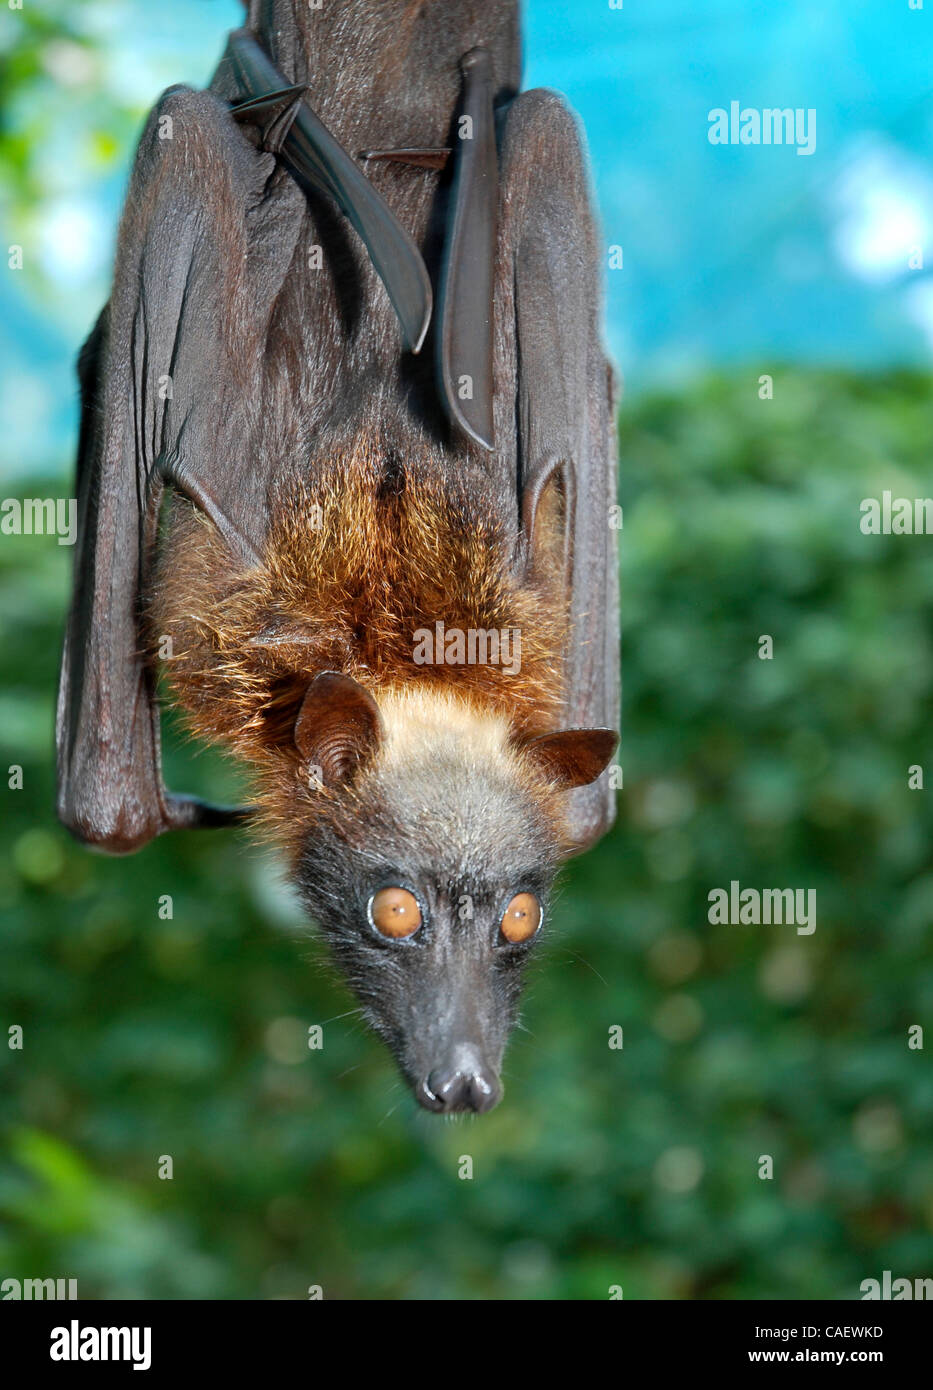 A captive fruit bat hangs from a branch near the Boracay Bat Cave, on  Boracay Island in the Philippines. The Acerodon Jubatus species is known as  the largest of its kind anywhere